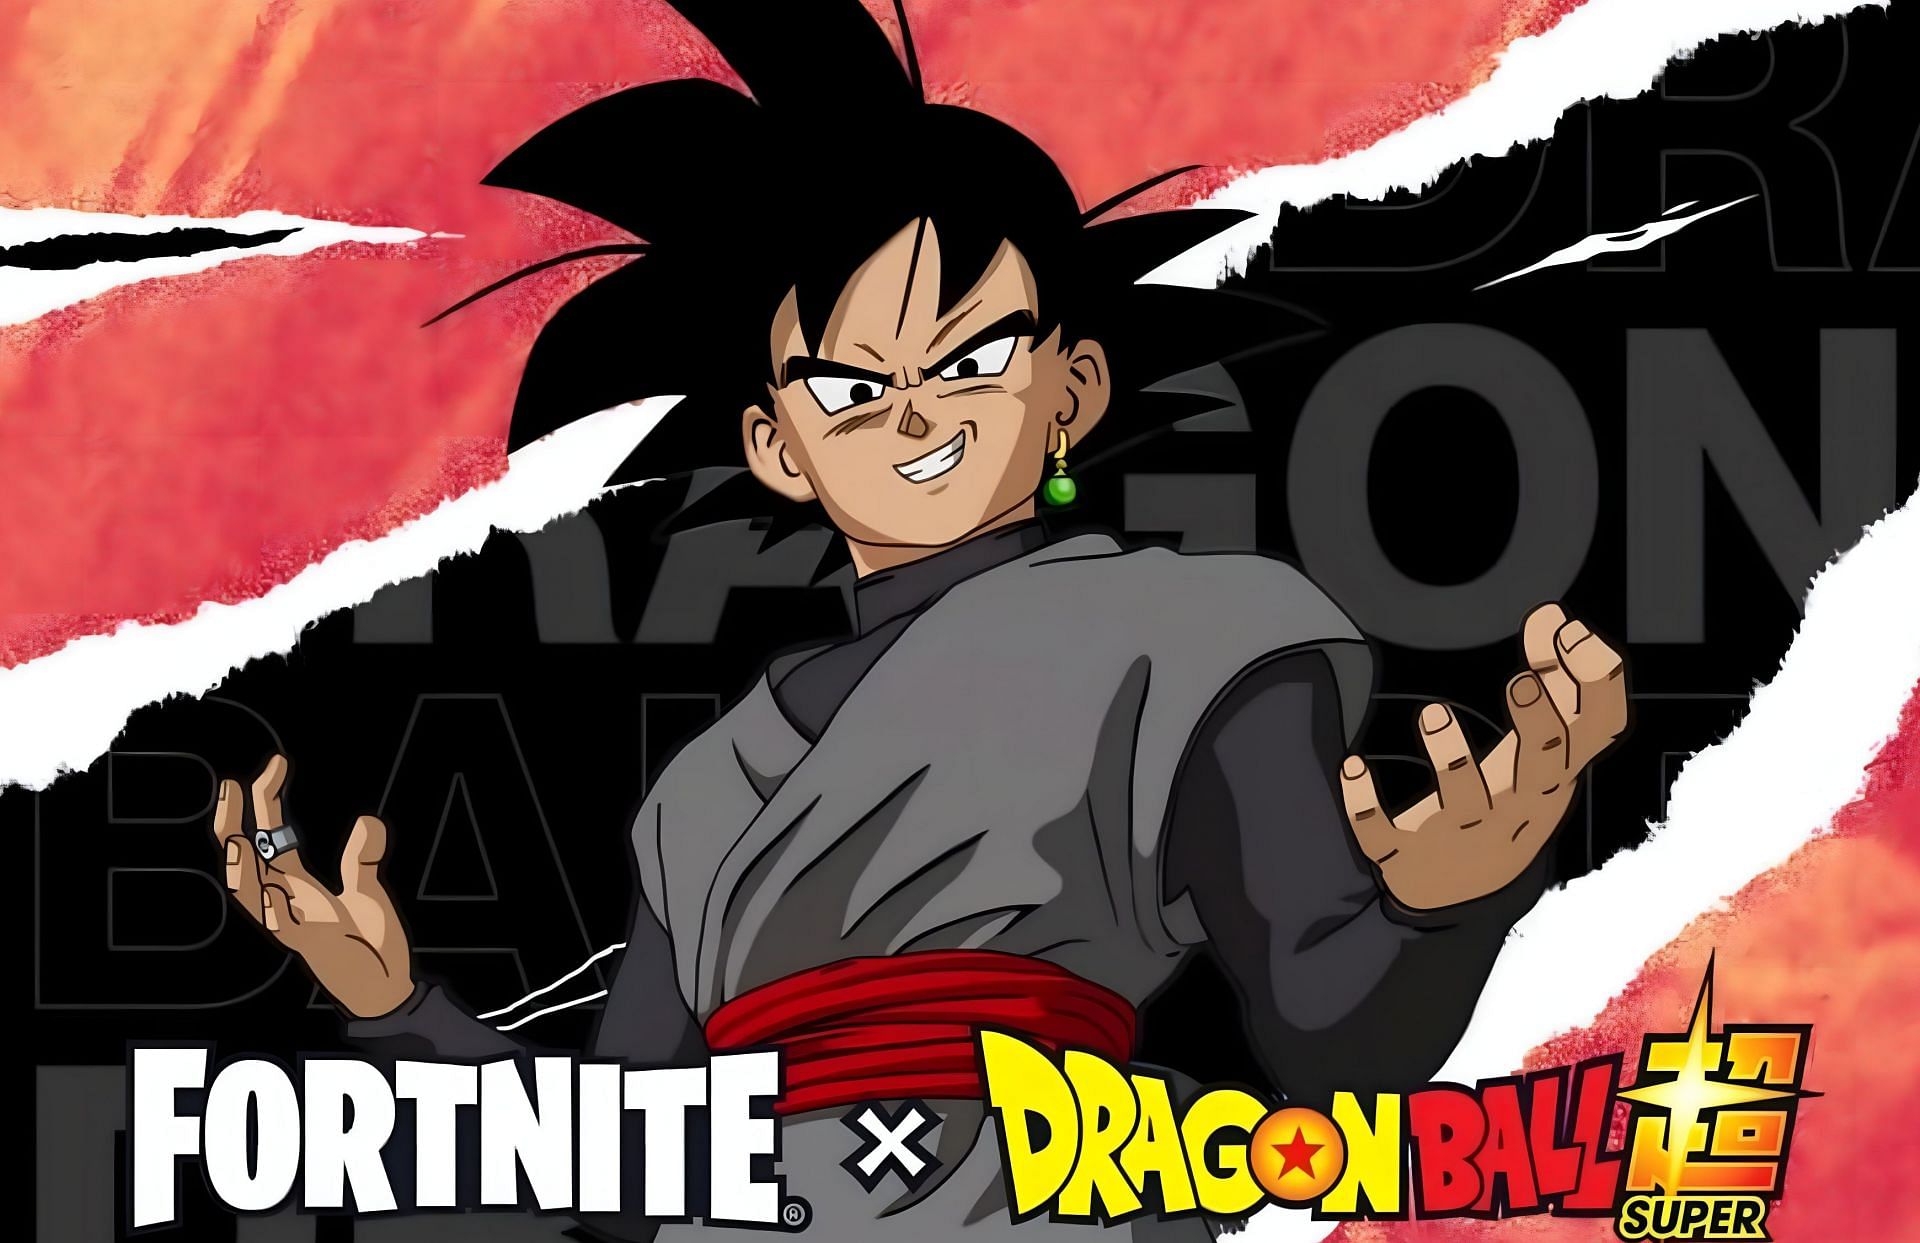 Fortnite Shares First Look At Goku Black Skin In Game